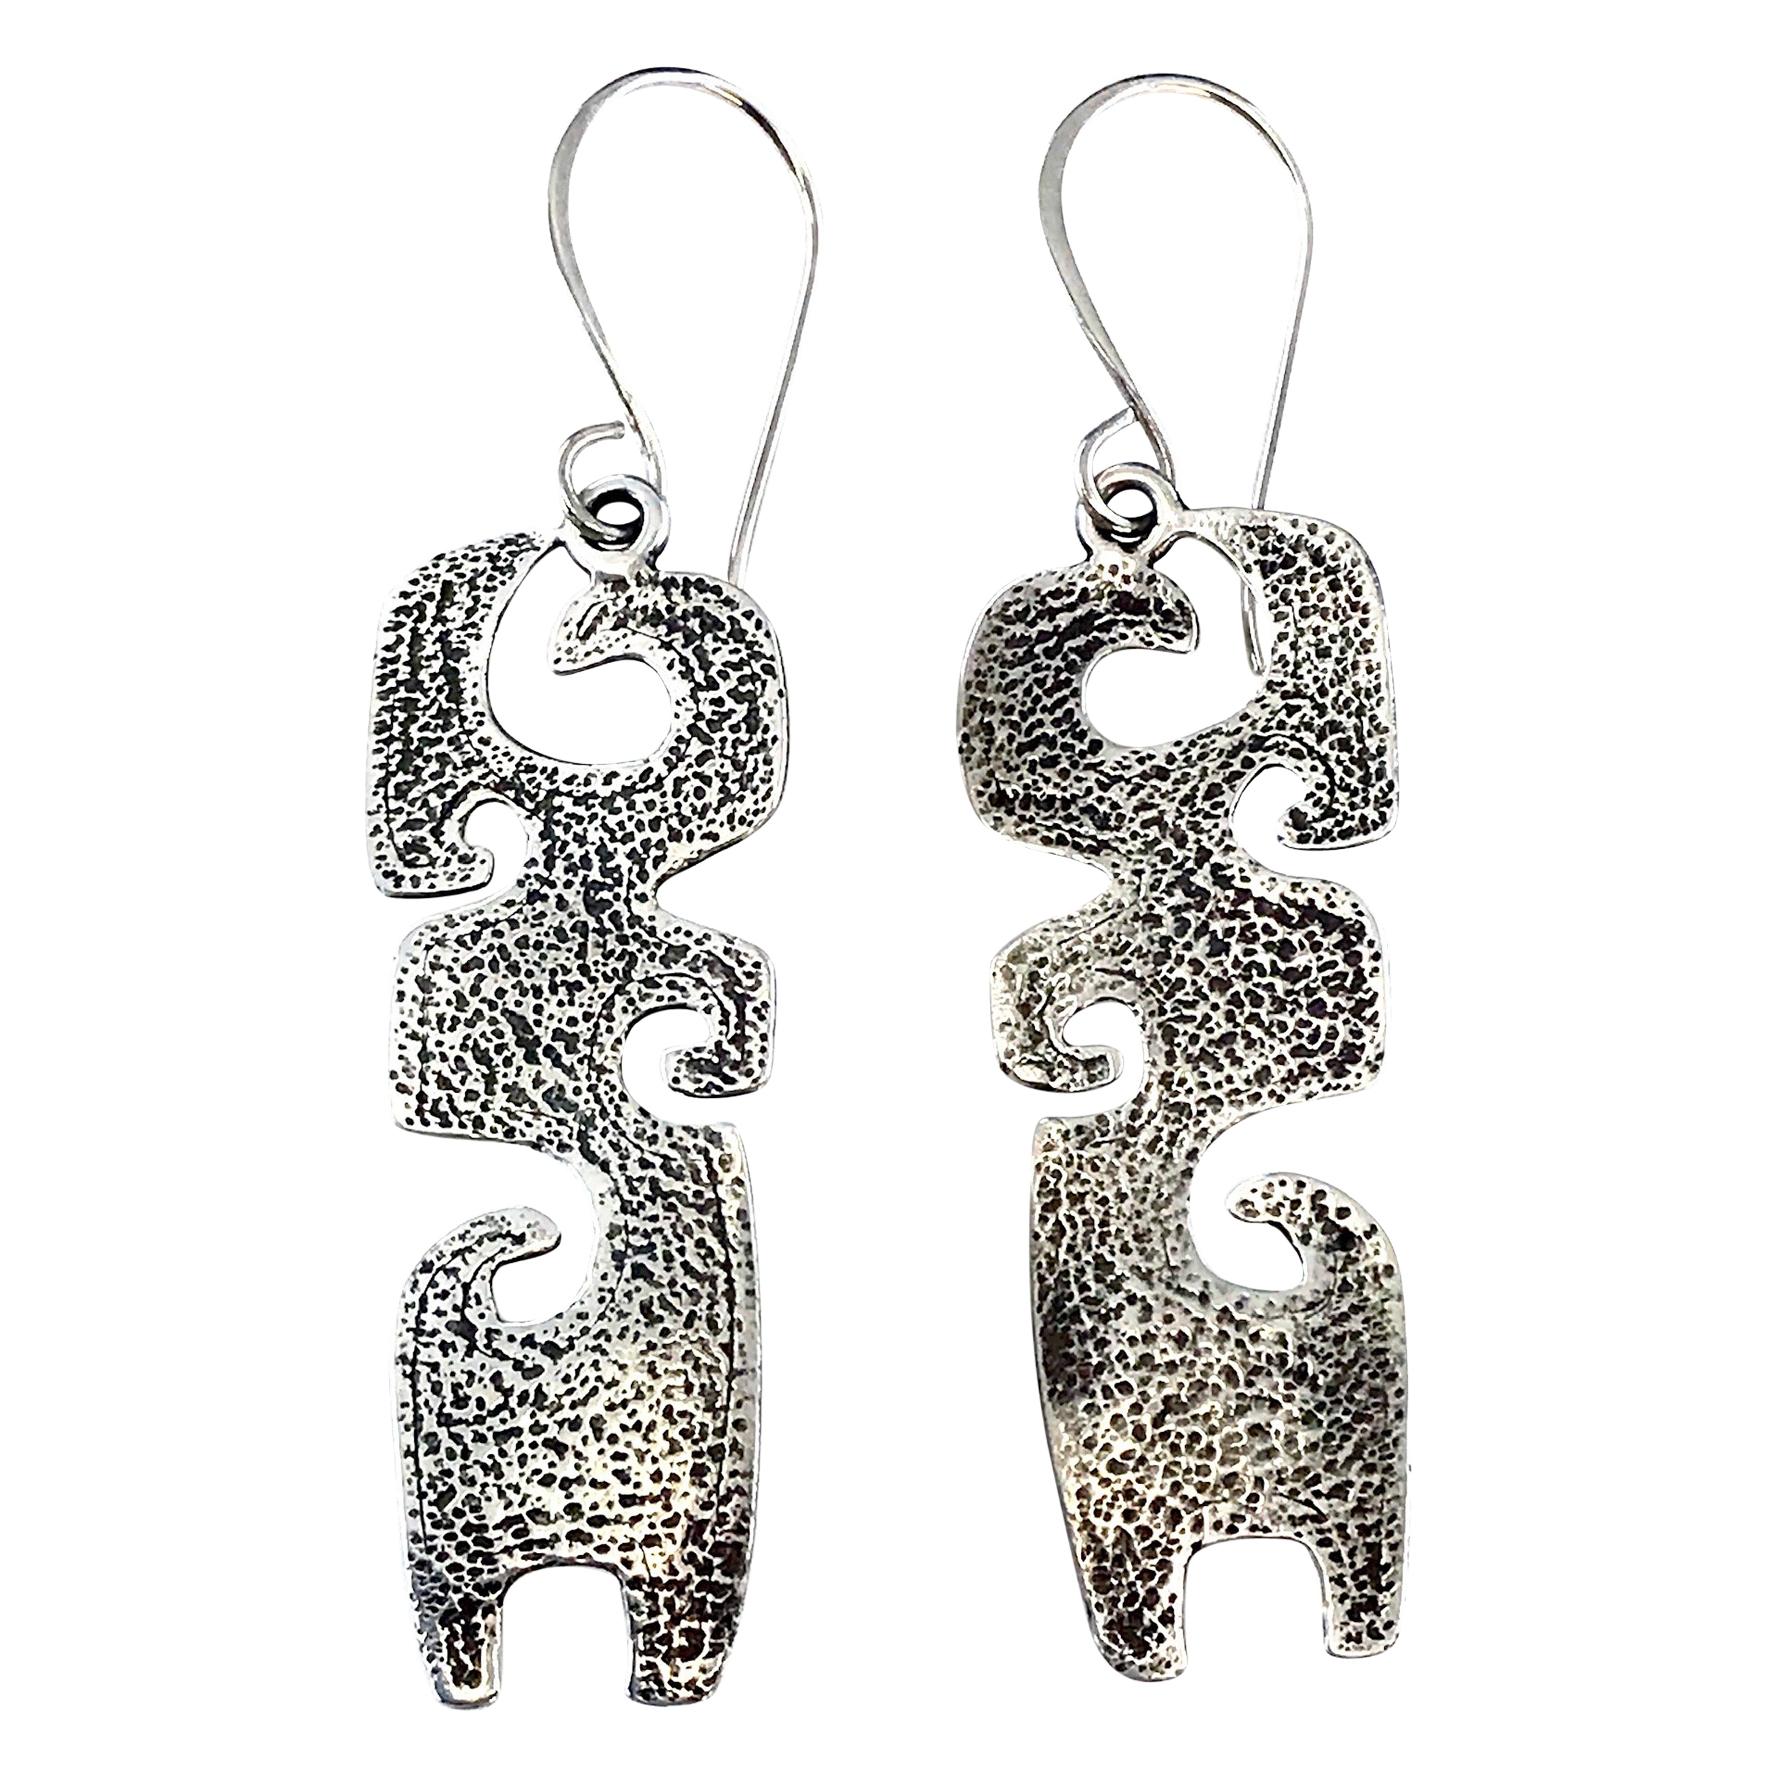 Grandchildren, cast silver earrings Melanie Yazzie contemporary Navajo designs

This is part of a series of imagery Melanie Yazzie uses in her printmaking, sculptures, and jewelry designs. The jewelry designs for Grandmother include this pendant